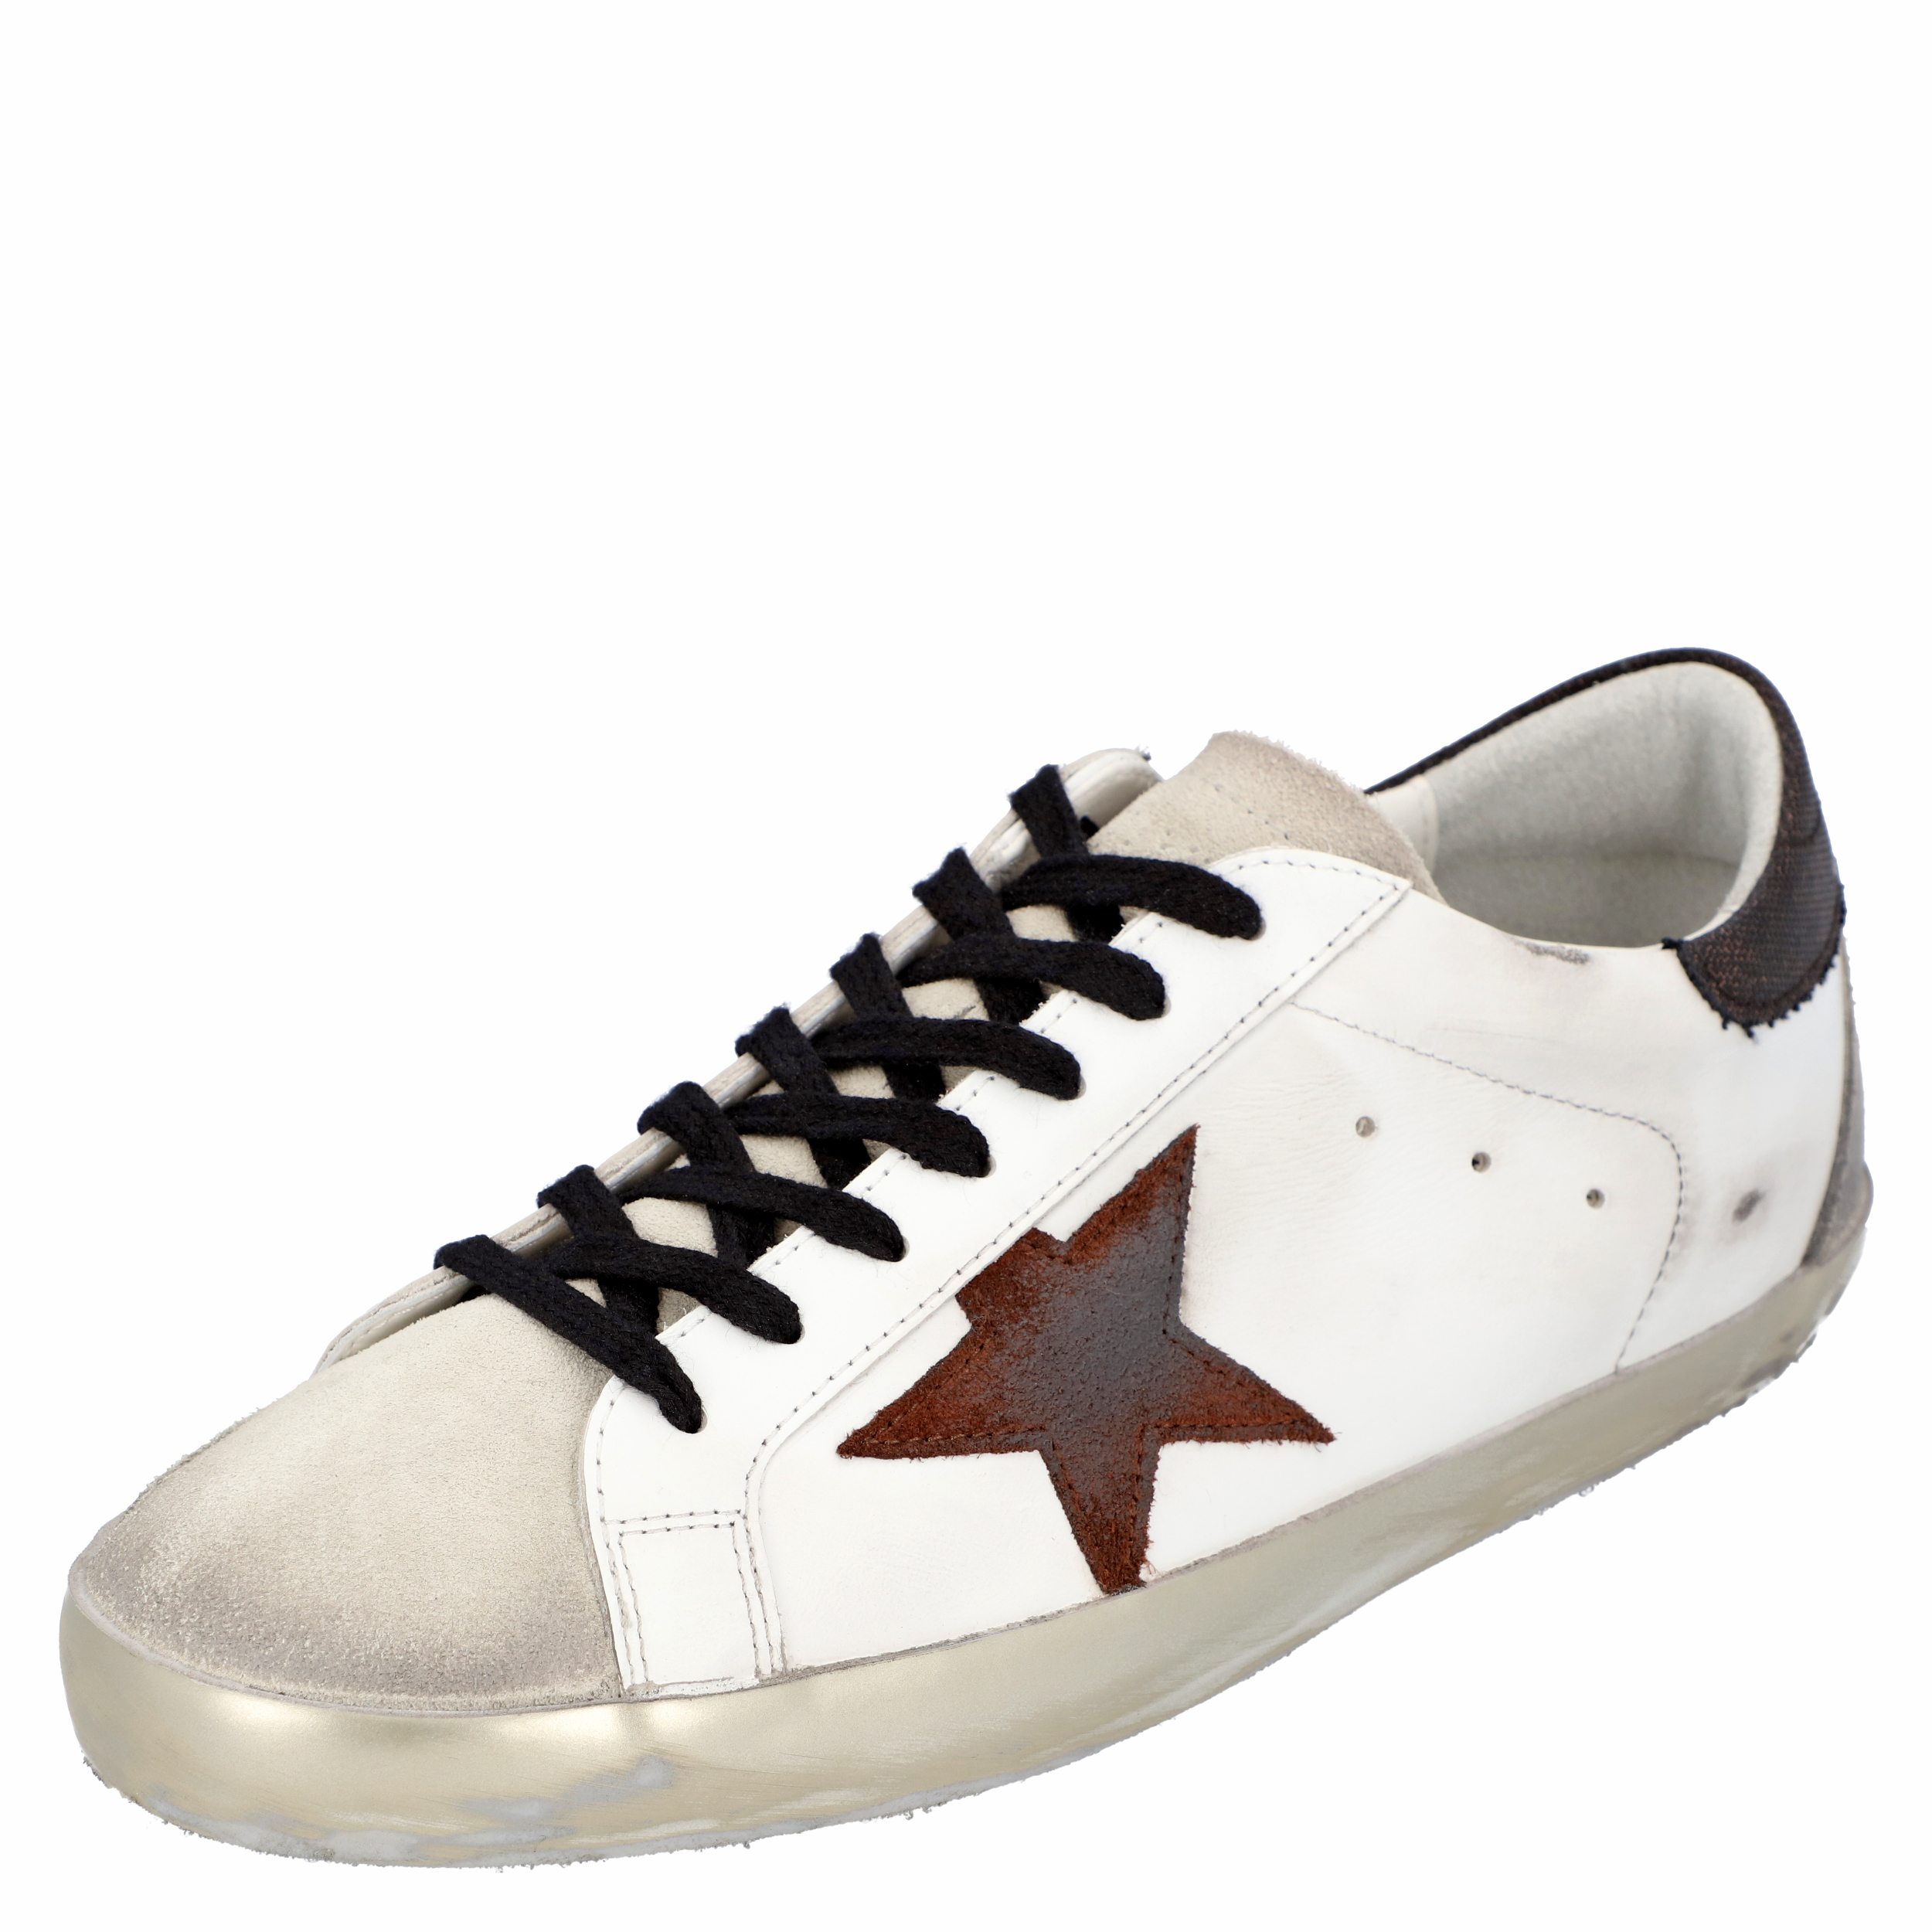 Golden Goose White/Black/Red Leather Superstar Sneakers Size EU 45